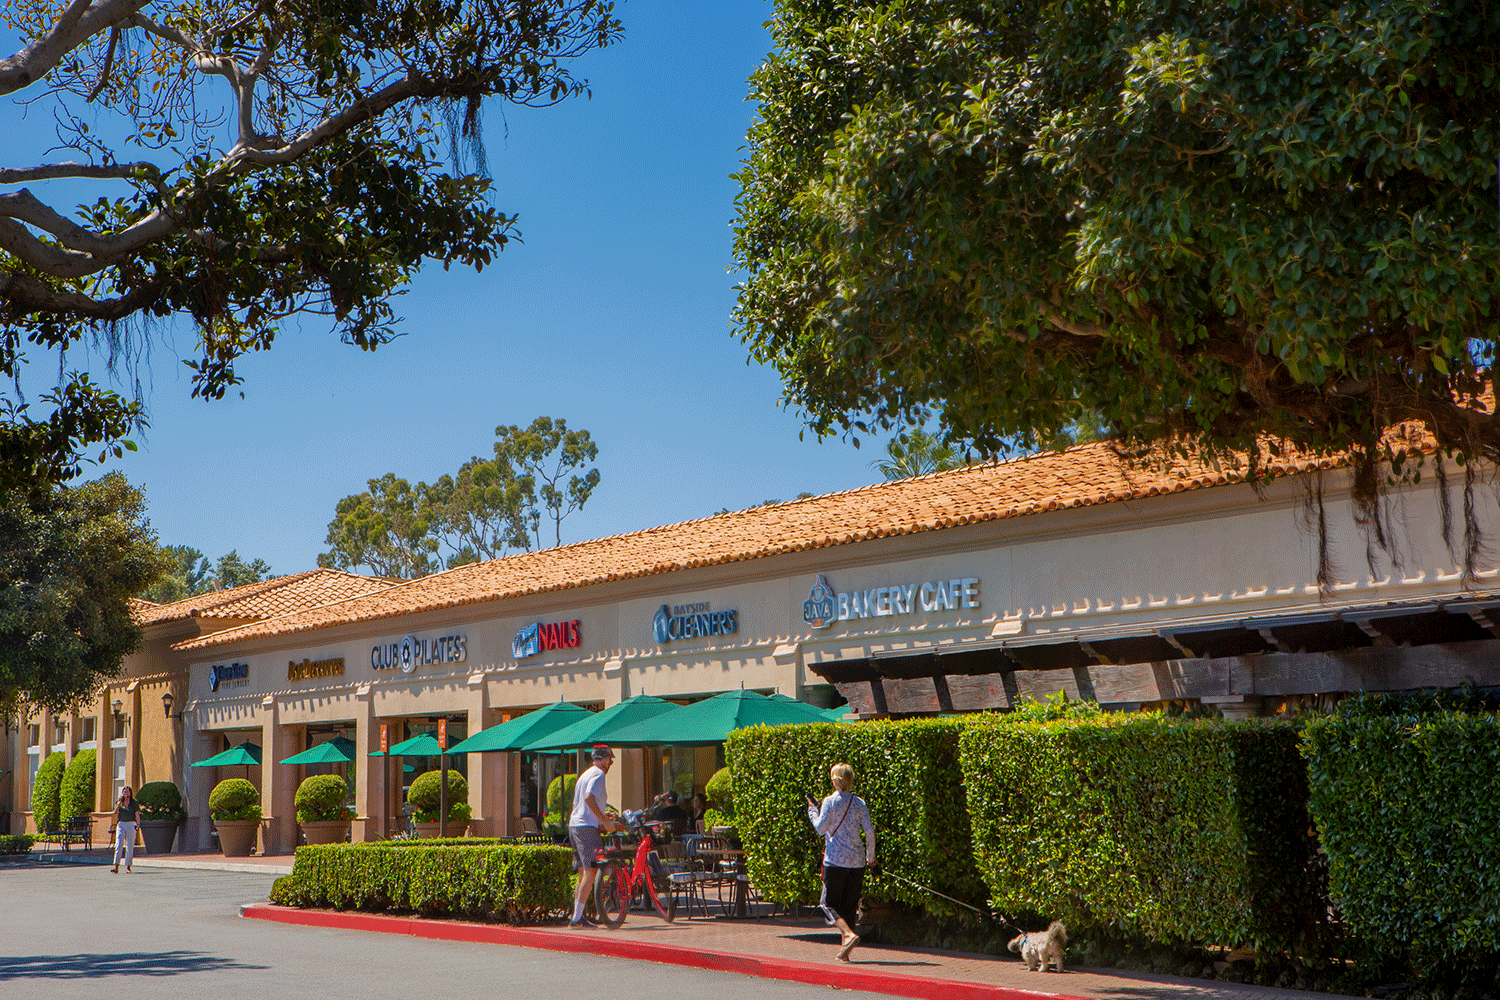  Daytime exterior view of Bayside Shopping Center